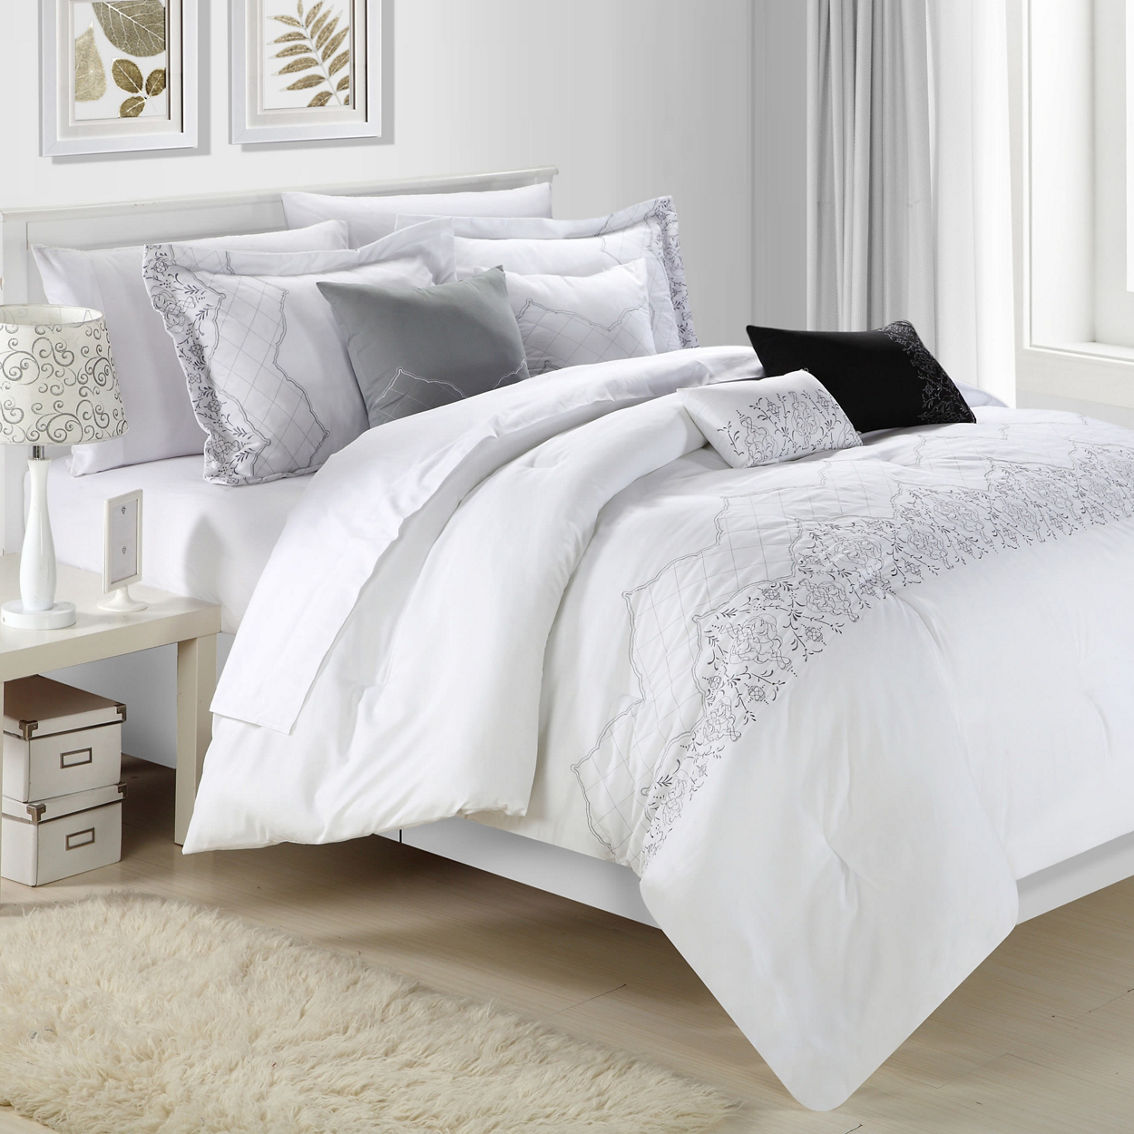 Chic Home Grace 12pc Comforter Set - Image 2 of 5